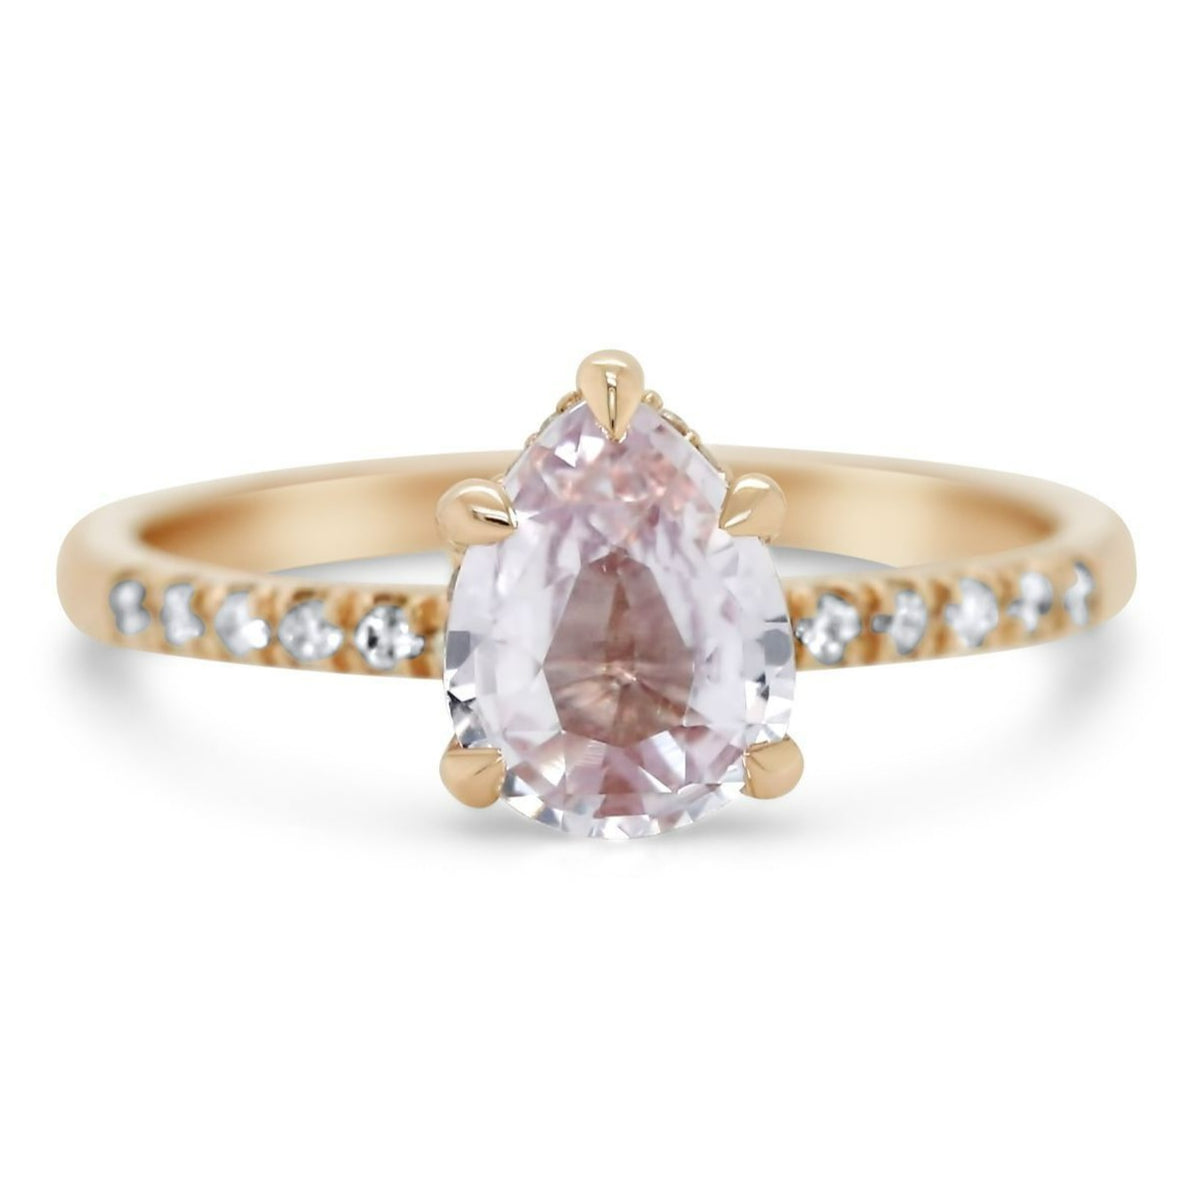 14k rose gold pear shaped peach sapphire engagement ring with diamonds on the band 